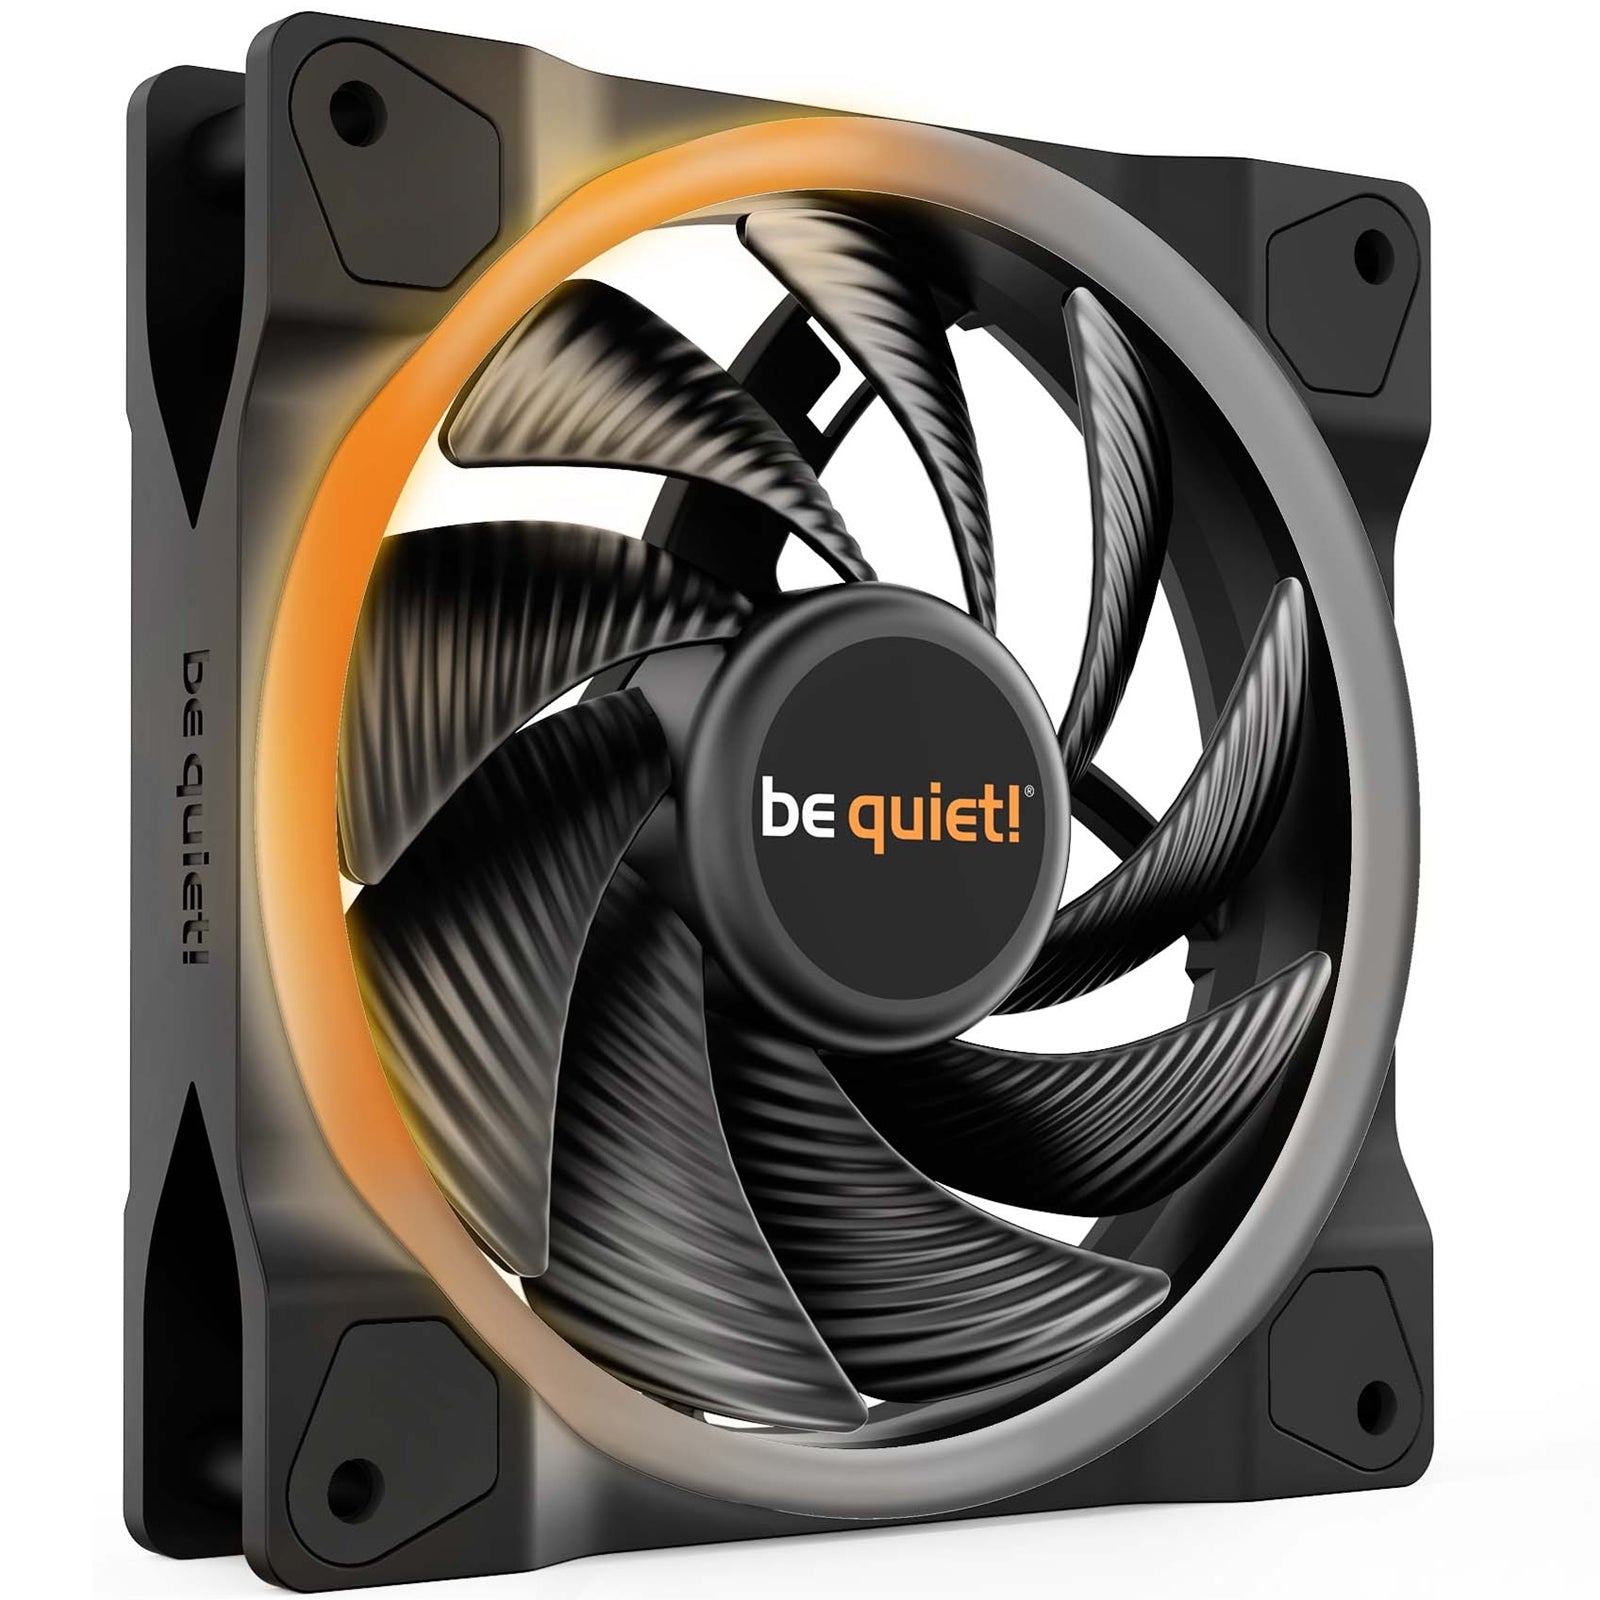 High-Speed ARGB Light Wings Fan by be quiet! - Superior Cooling & Impressive Lighting